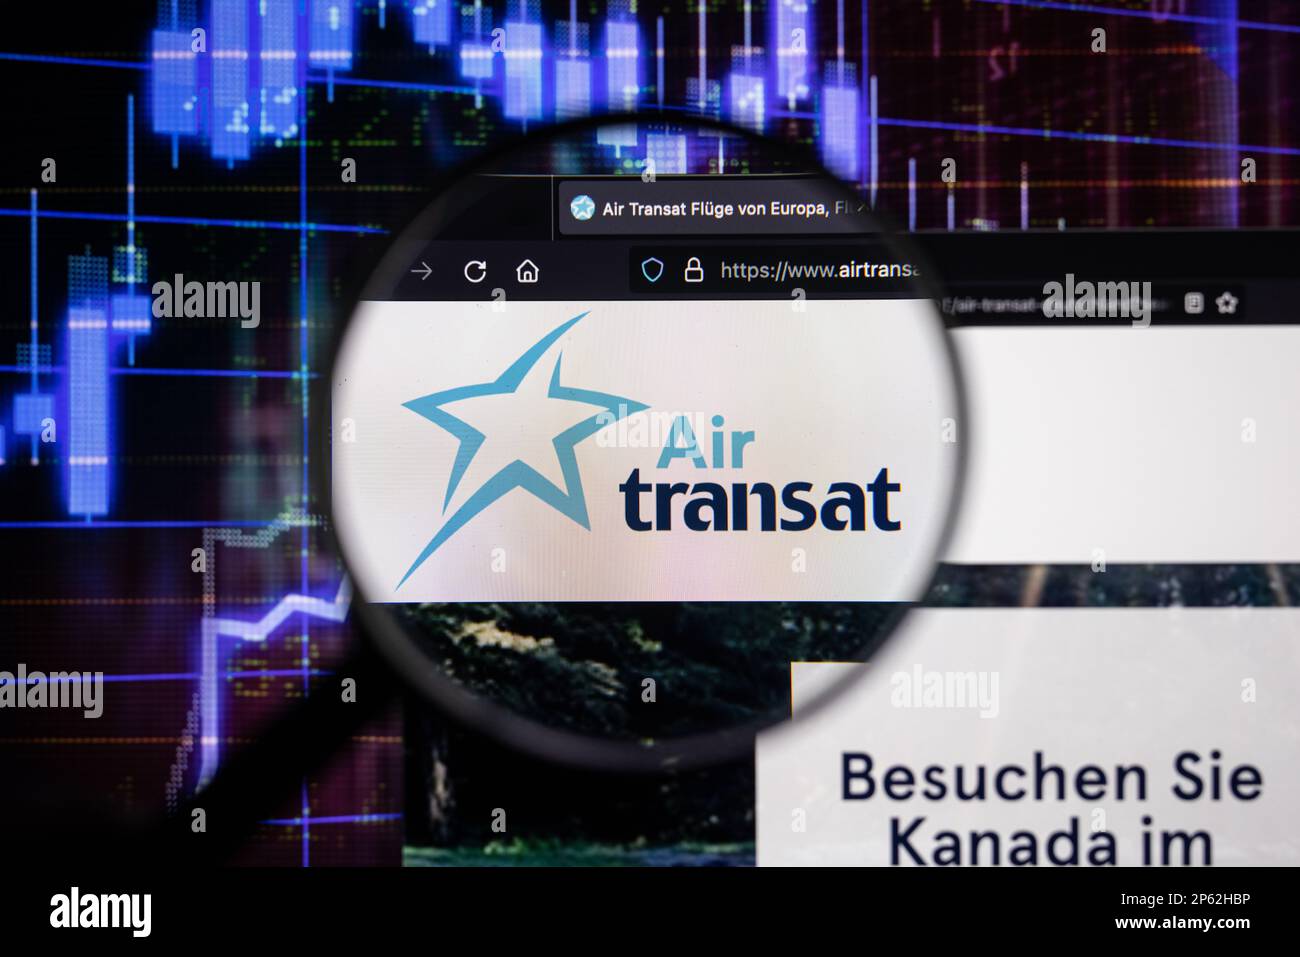 Air transat company logo on a website with blurry stock market developments in the background, seen on a computer screen through a magnifying glass Stock Photo